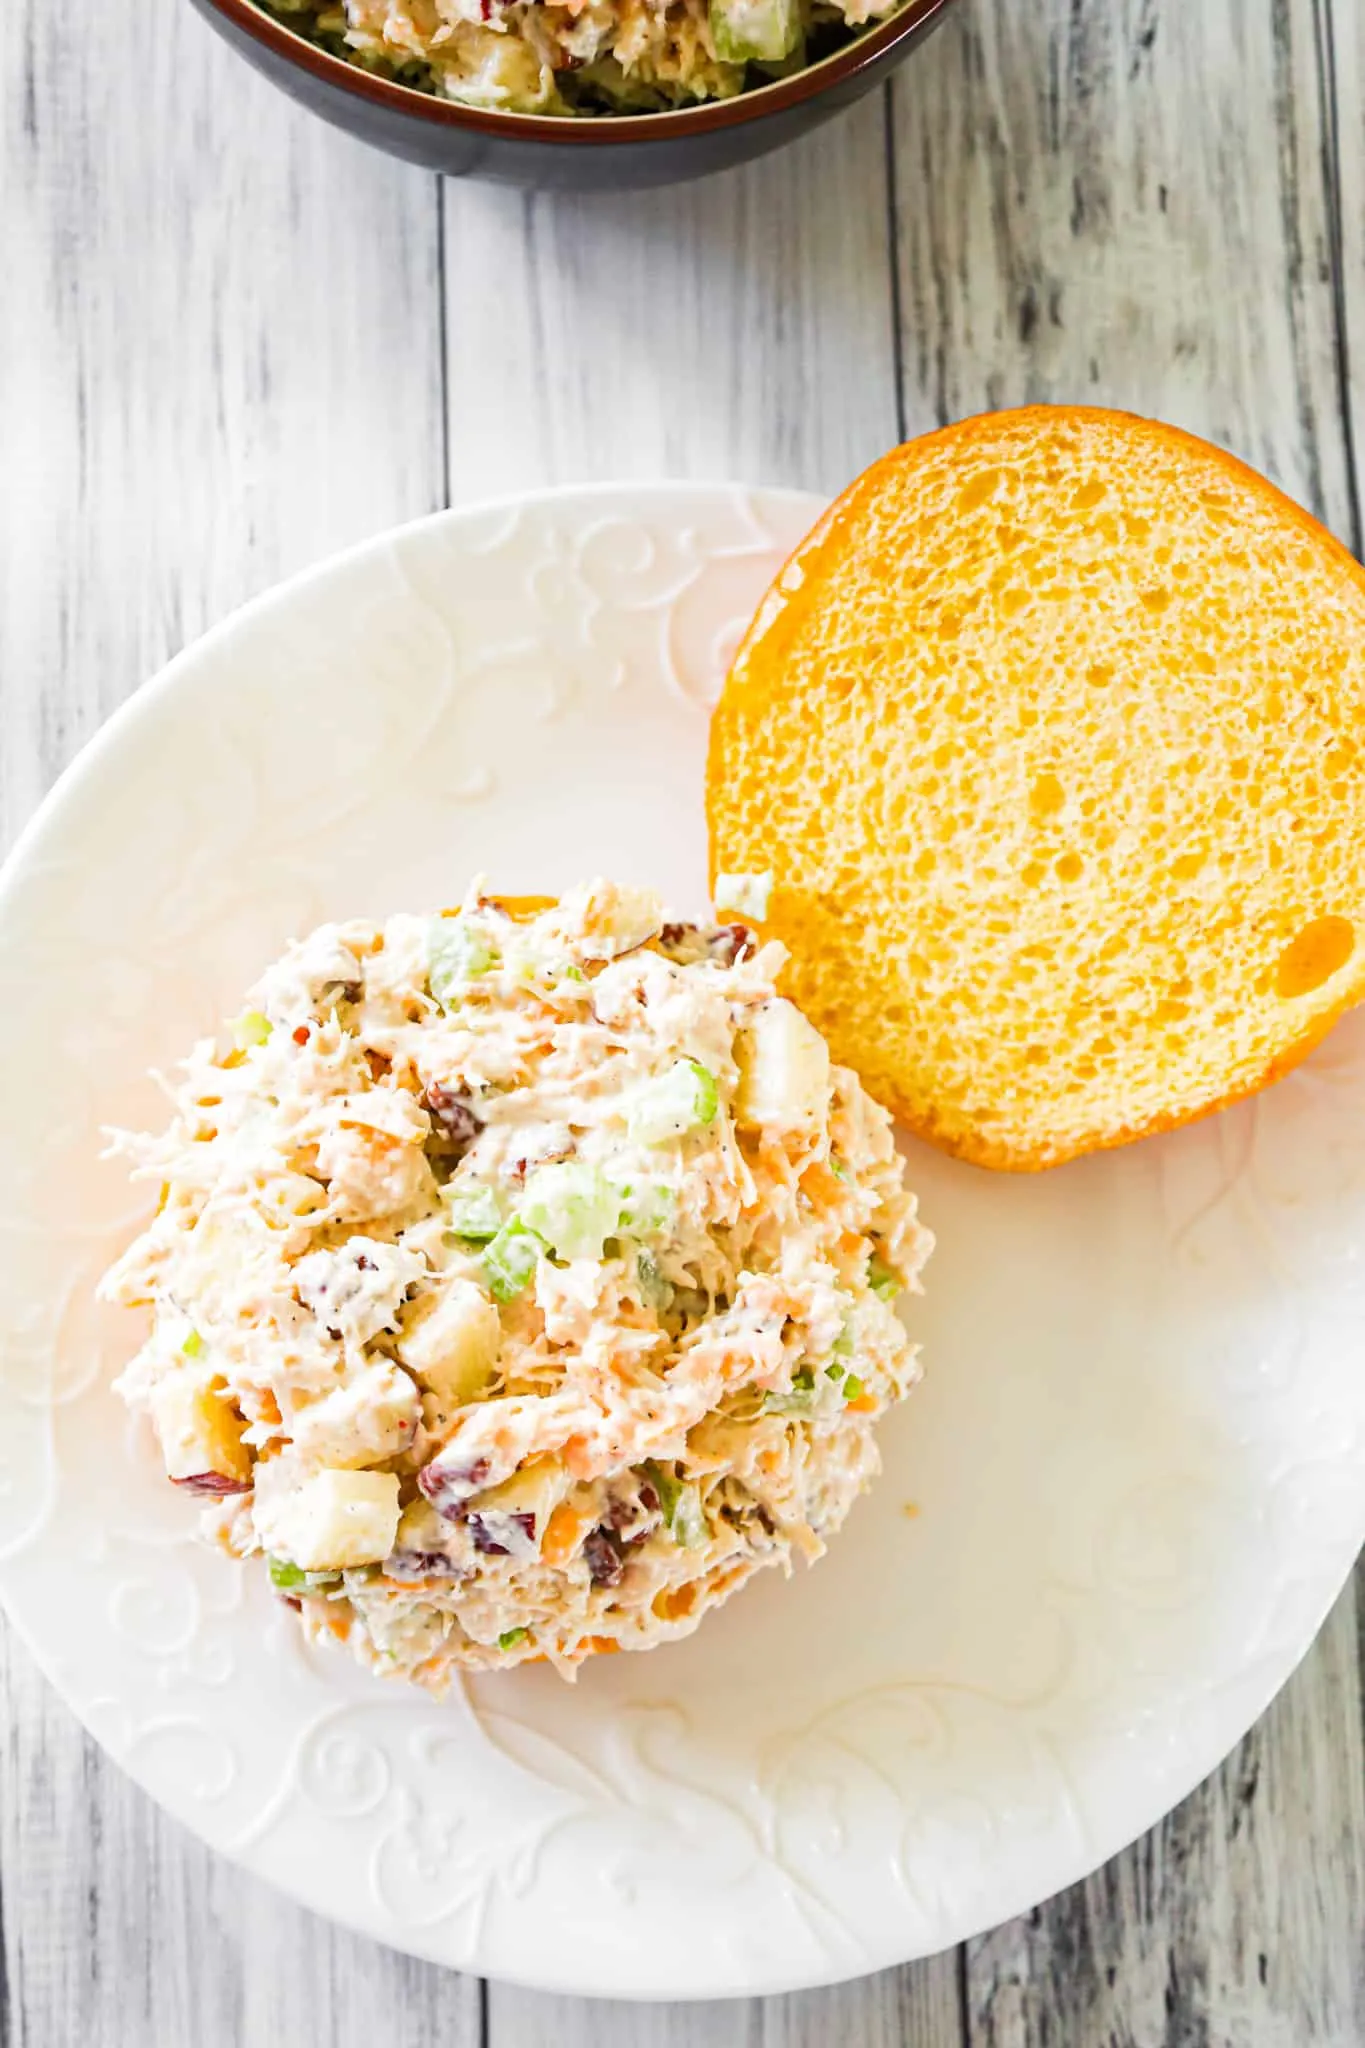 Chicken Salad with Apples is tasty lunch or dinner recipe using shredded rotisserie chicken and loaded with mayo, celery, diced apples, pecans and shredded cheddar.